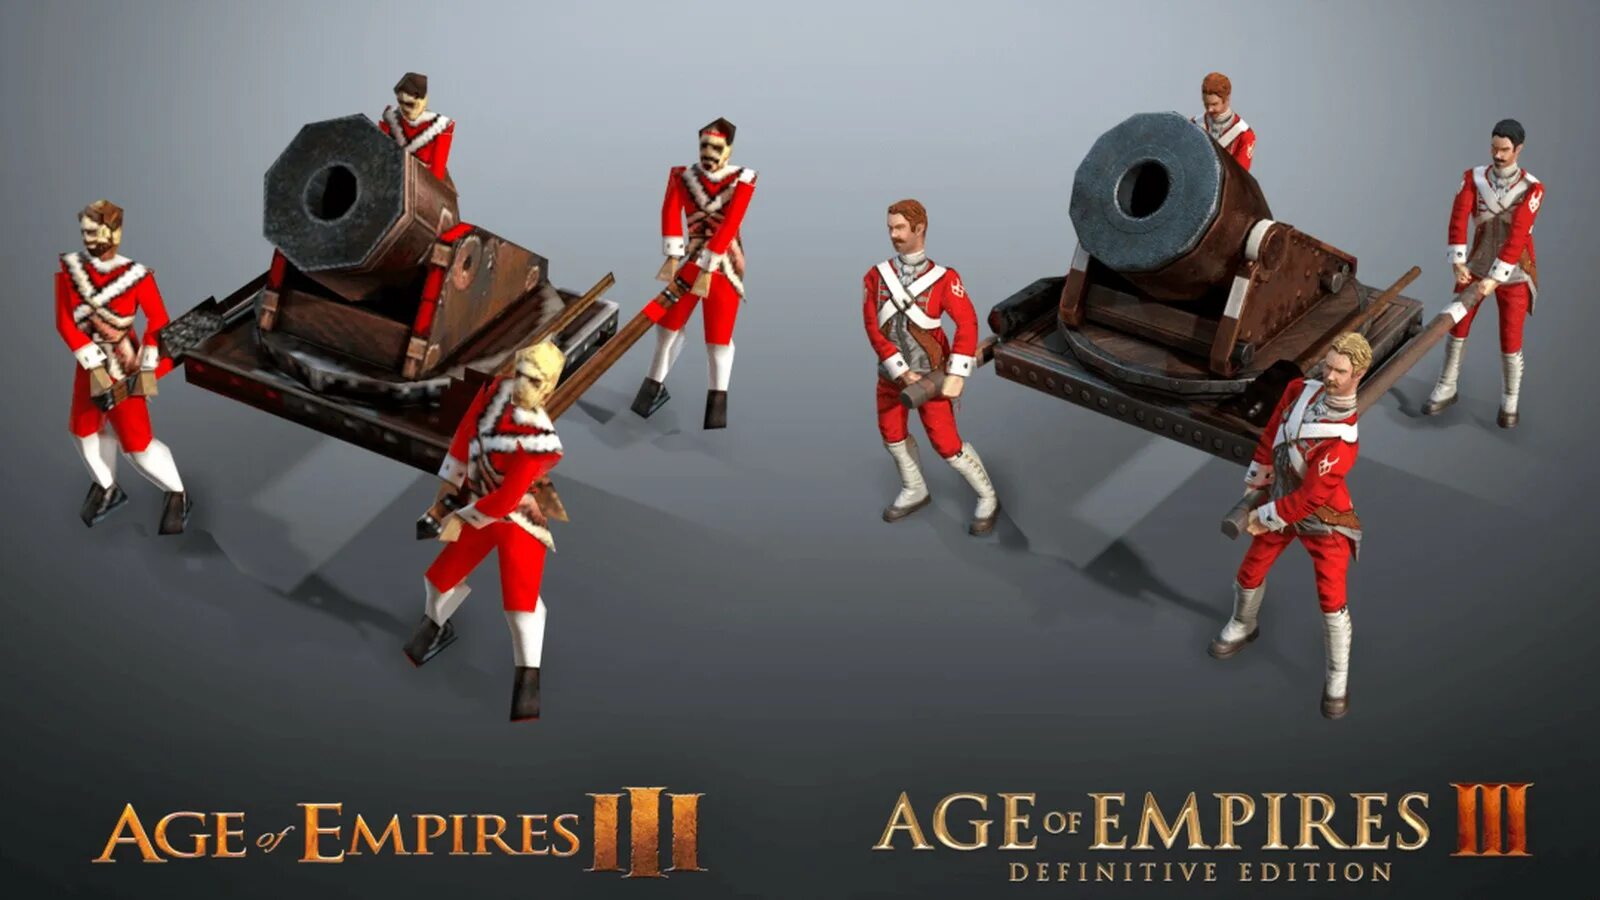 Age of Empires 3 ремастер. Age of Empires 3 Definitive. Age of Empires III: Definitive Edition. AOE 3 Definitive Edition. Age pf